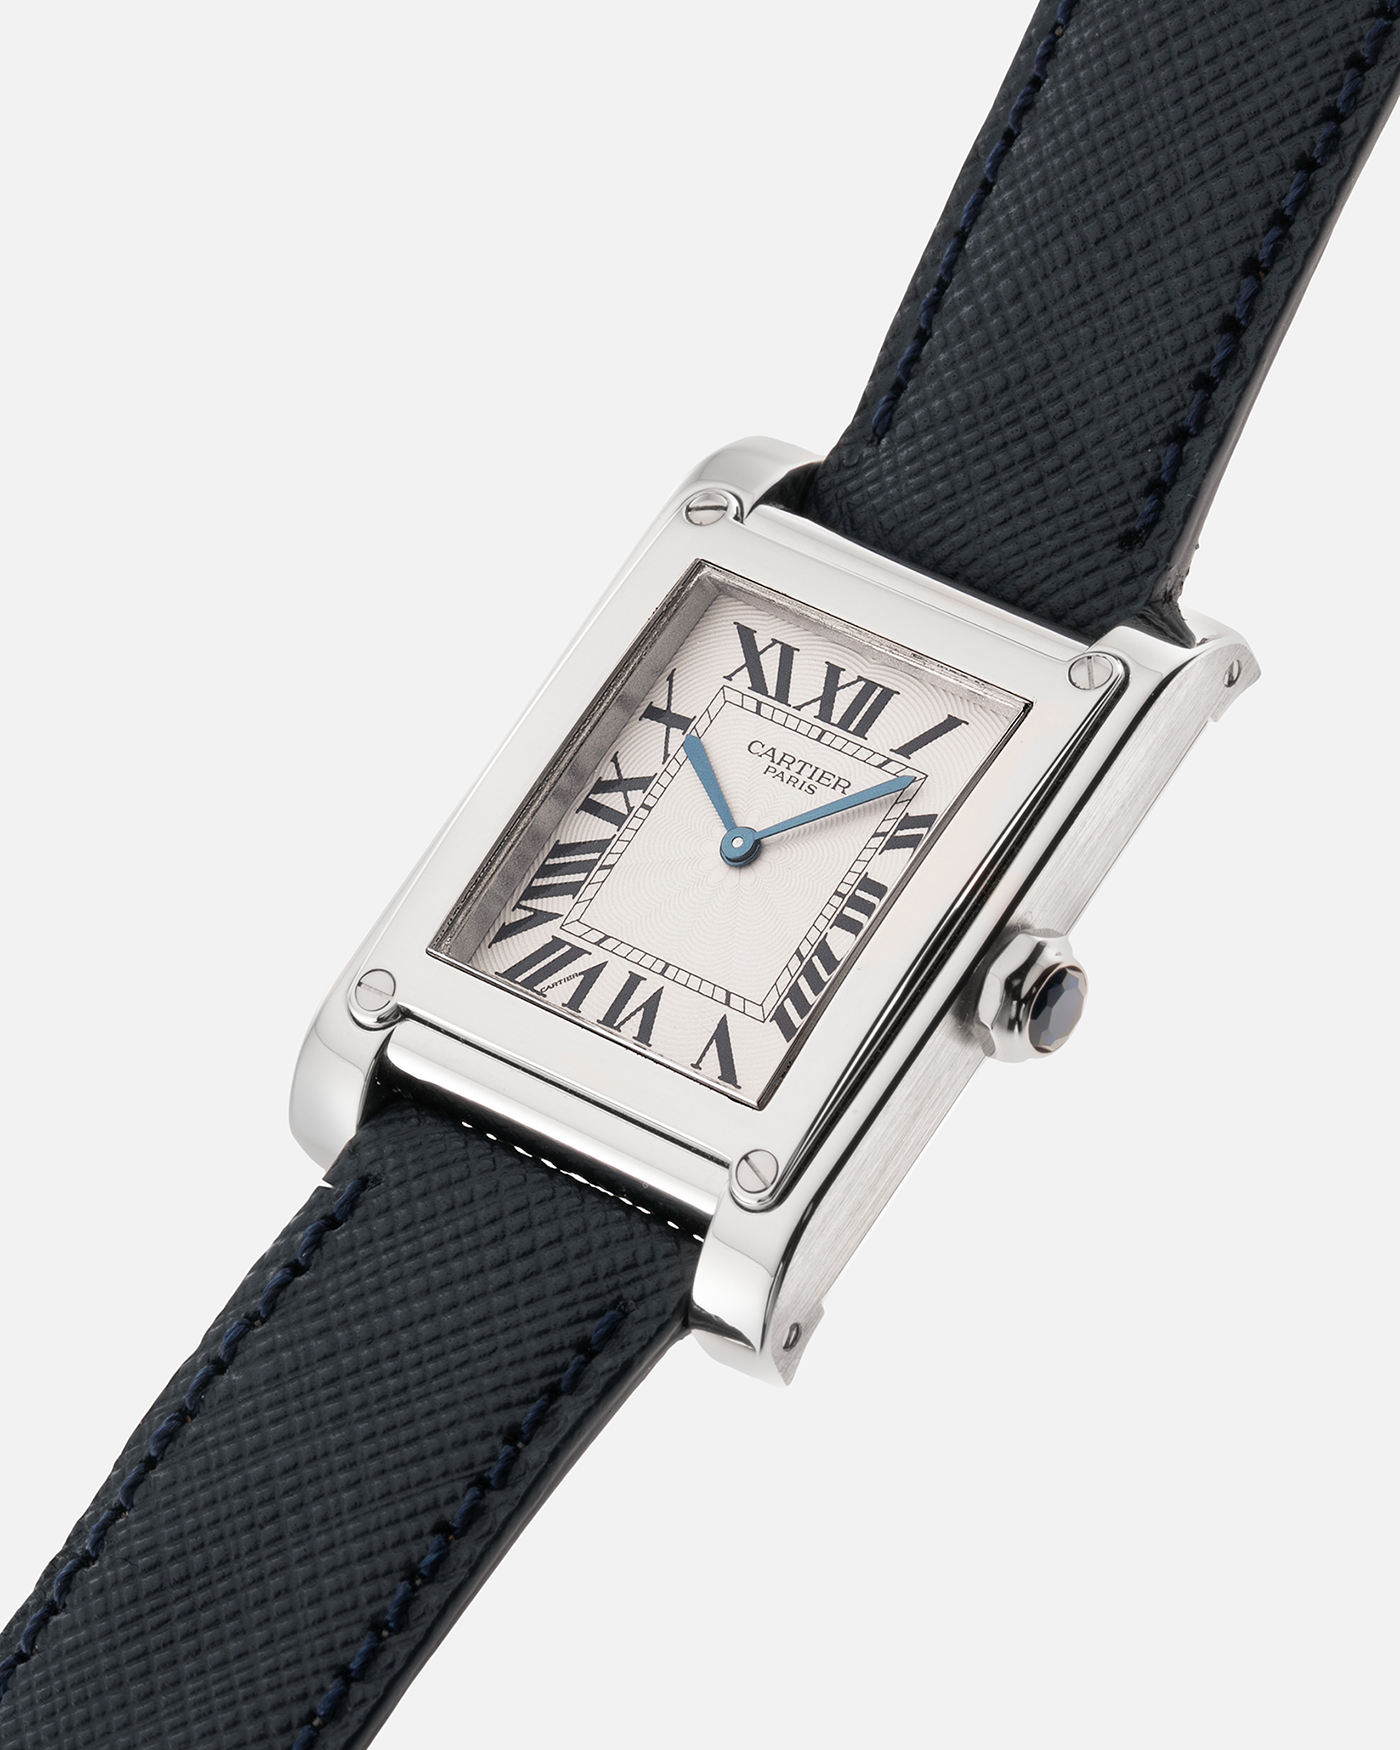 Brand: Cartier Year: 2000’s Model: Tank A Vis Material: Platinum Movement: Cartier 437MC Case Diameter: 26mm X 39mm Strap: Molequin Navy Blue Textured Calf and 18k White Gold Deployant Clasp